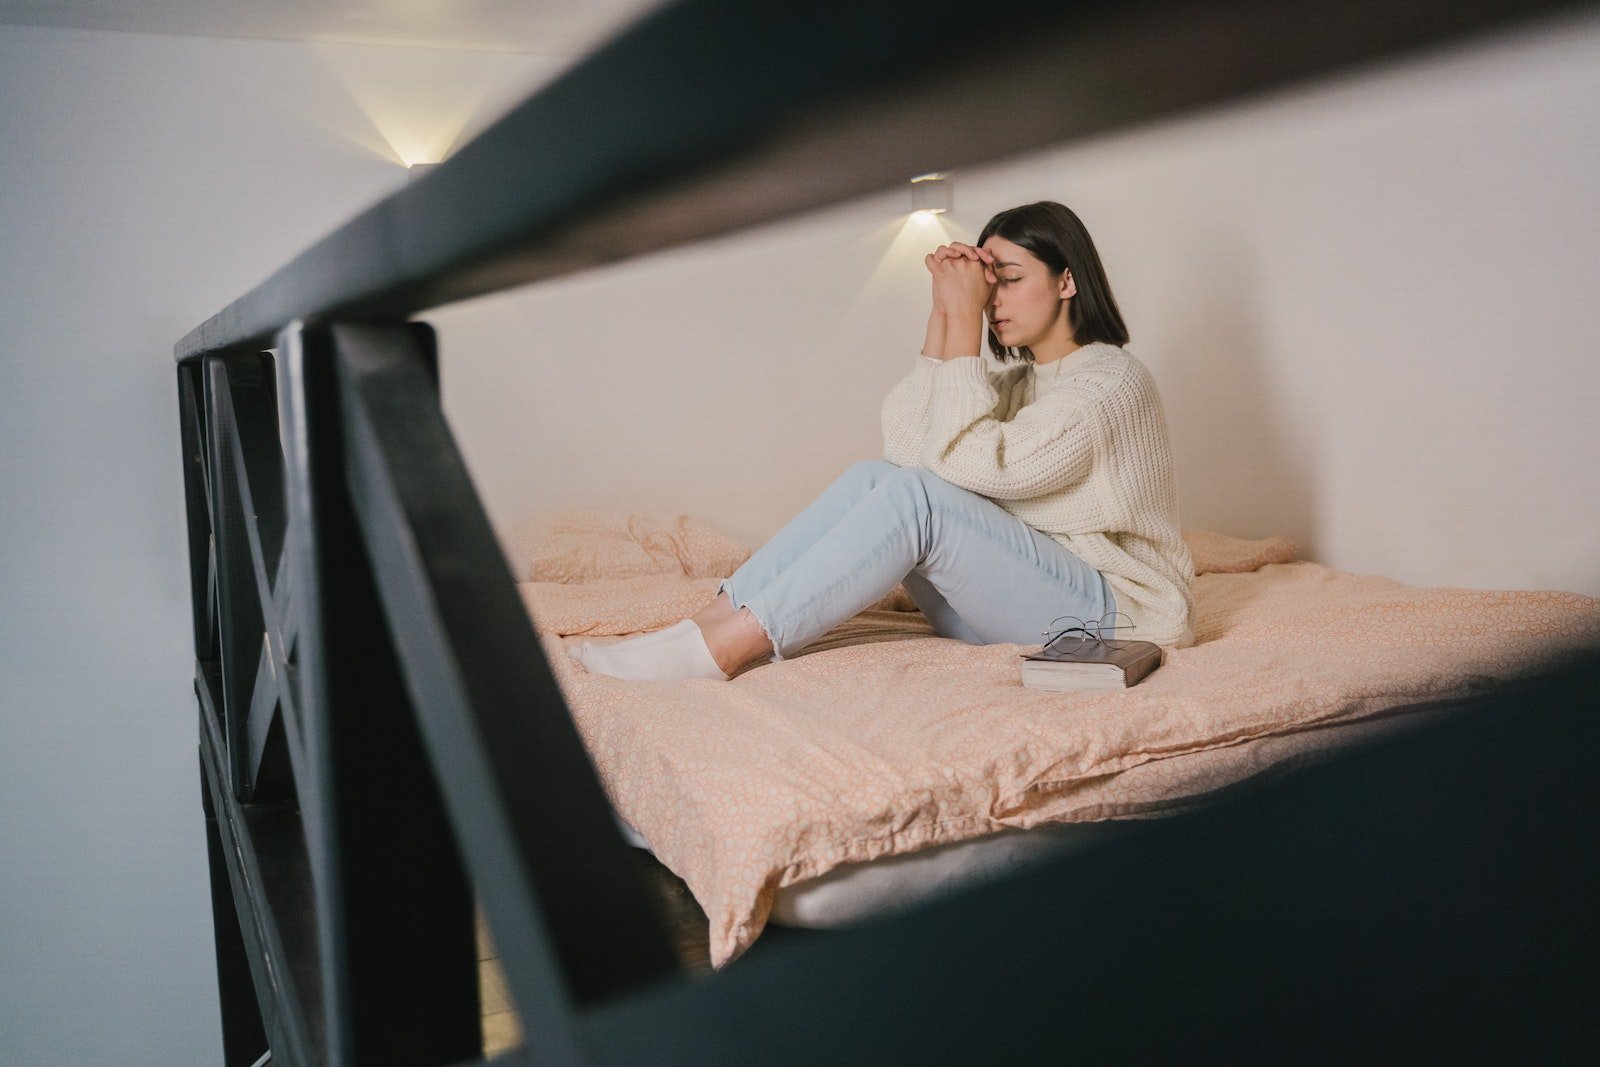 Oración para encontrar trabajo, Woman in White Sweater and Blue Denim Jeans Sitting on Bed